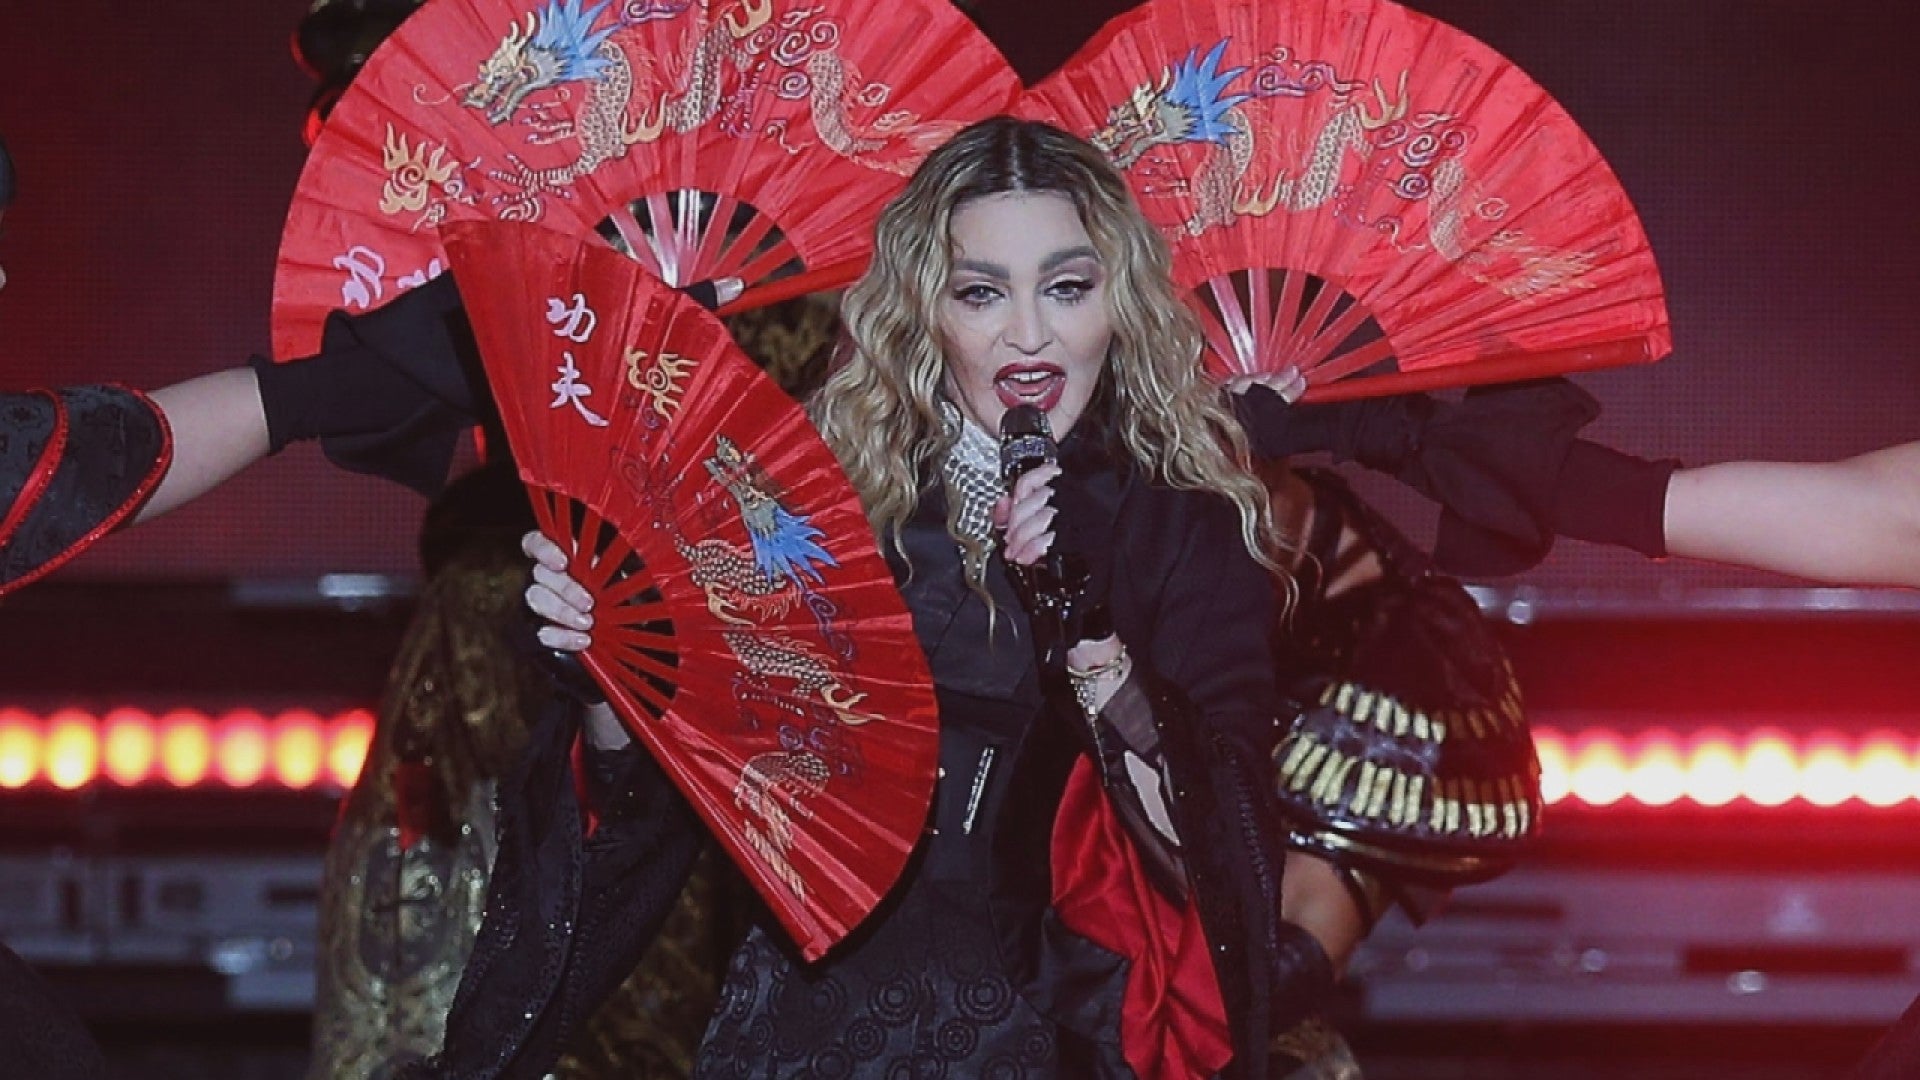 Big Asian Boobs Webcam - Madonna Exposes 17-Year-Old Fan's Breast During Concert, Teen Calls It the  'Best Moment of Life' | Entertainment Tonight